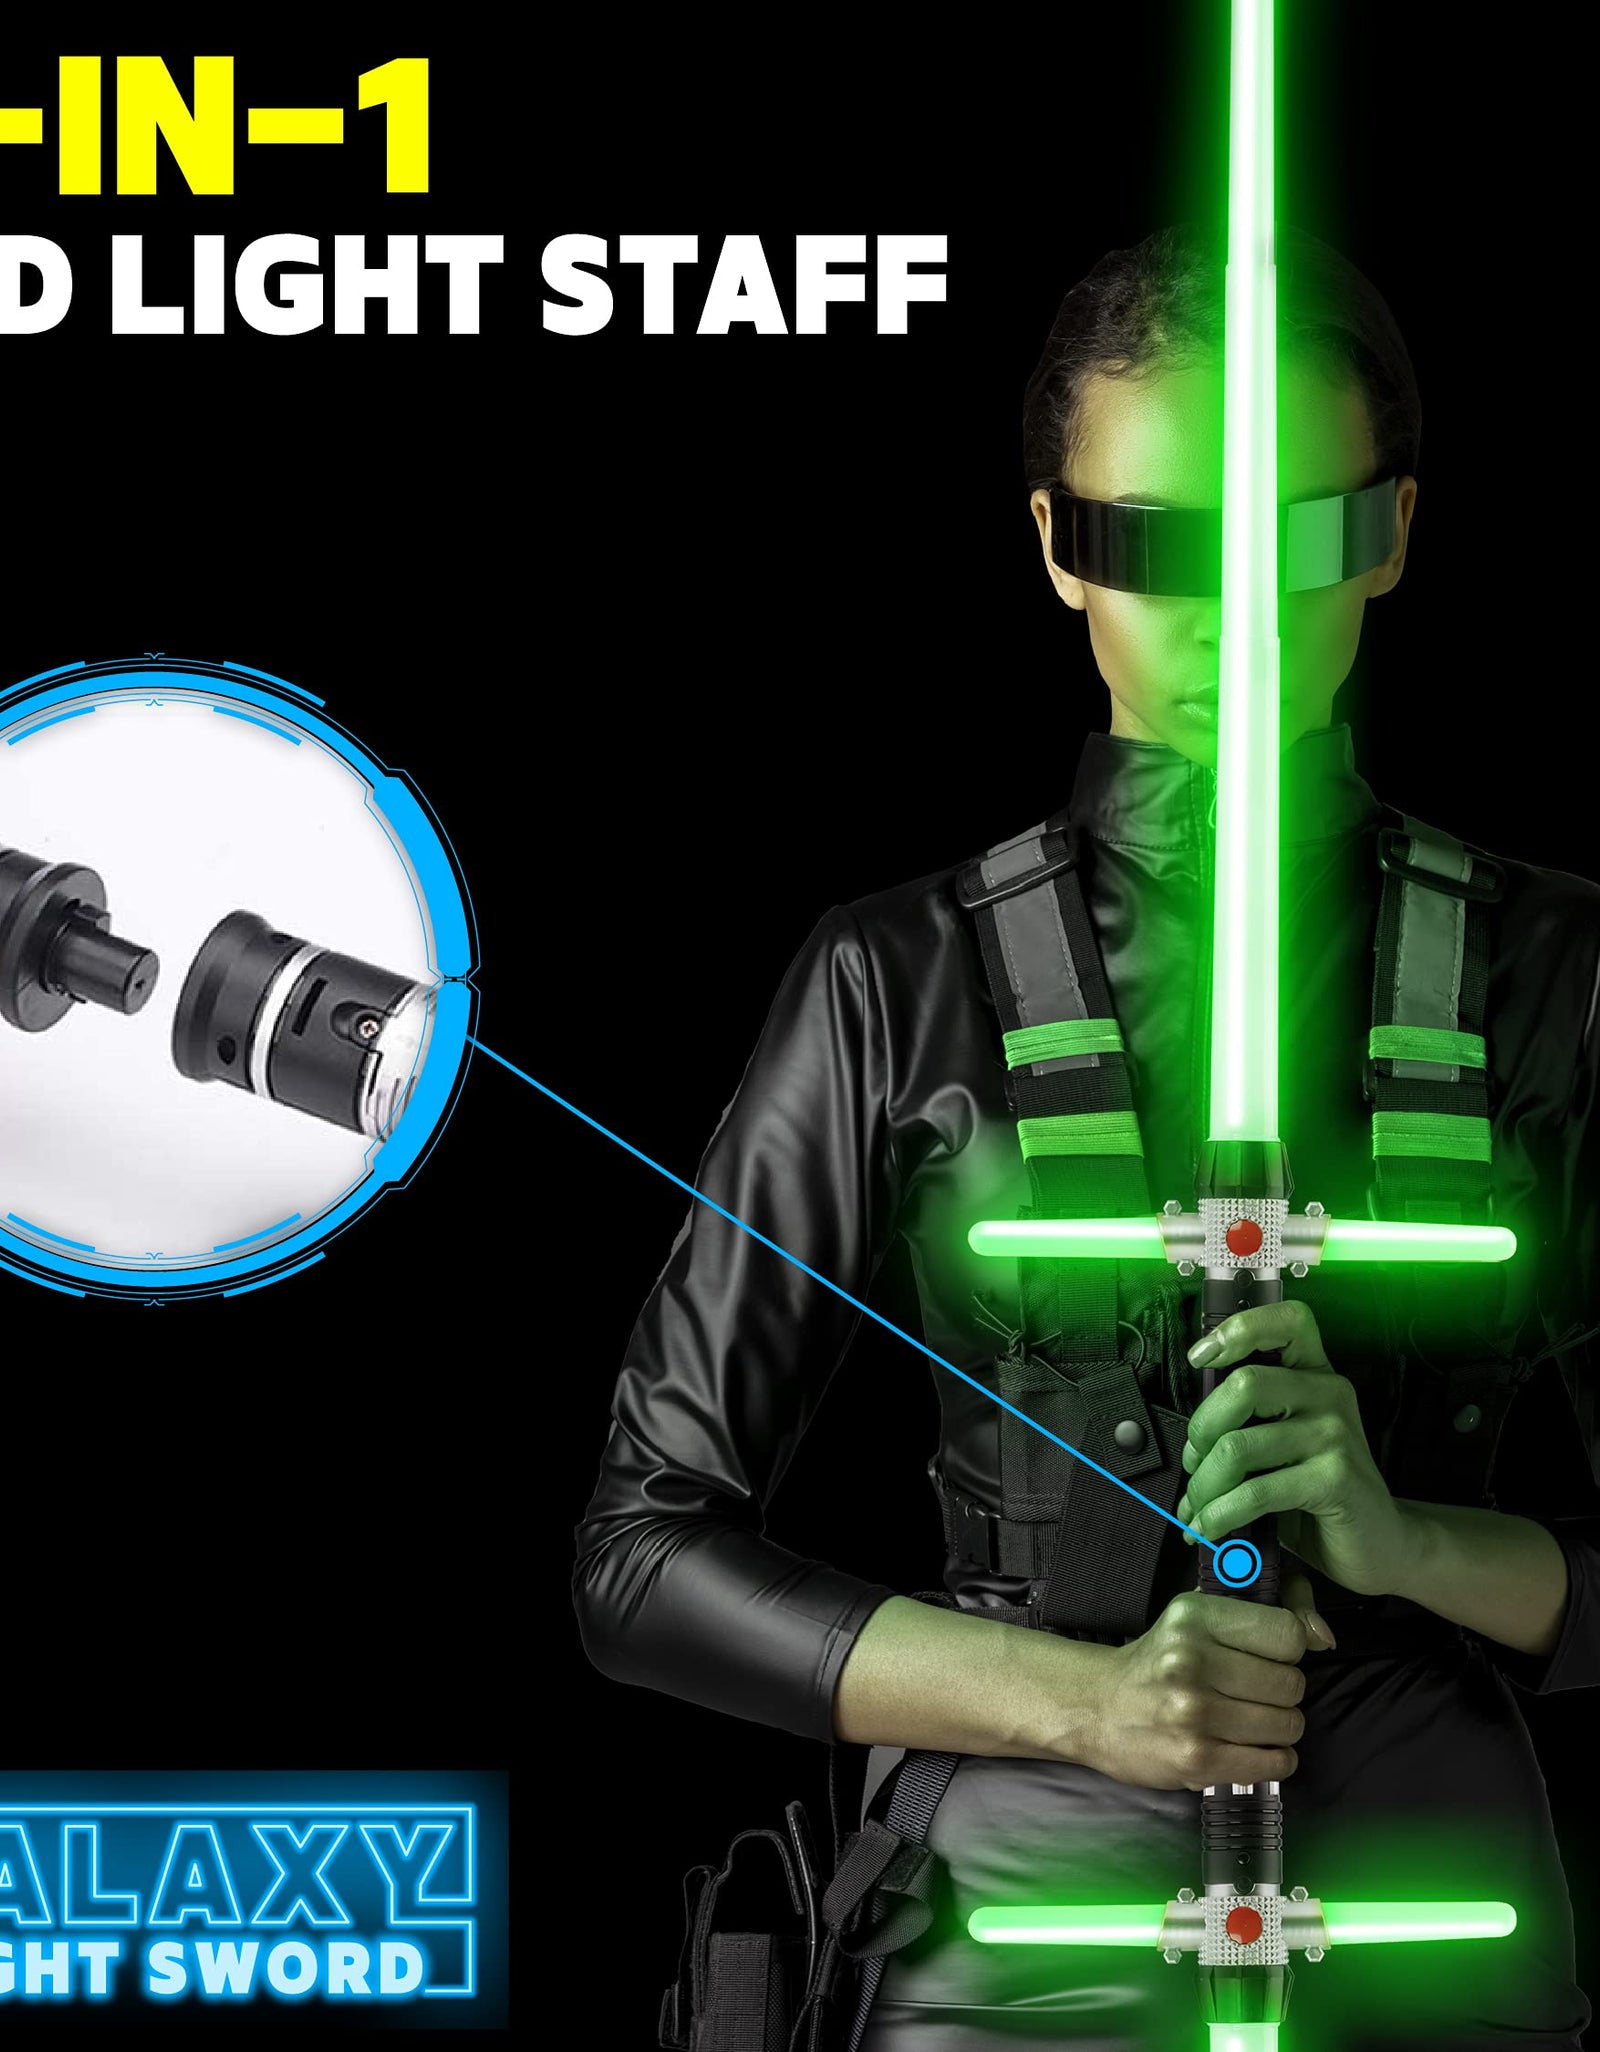 USA Toyz Galaxy Light Up Saber for Kids or Adults - 2-in-1 LED Dual Light Swords Set with FX Sound, 6 Color-Changing LEDs, Motion Sensitive, Retractable, Expandable Light Saber Double-Sided Connector